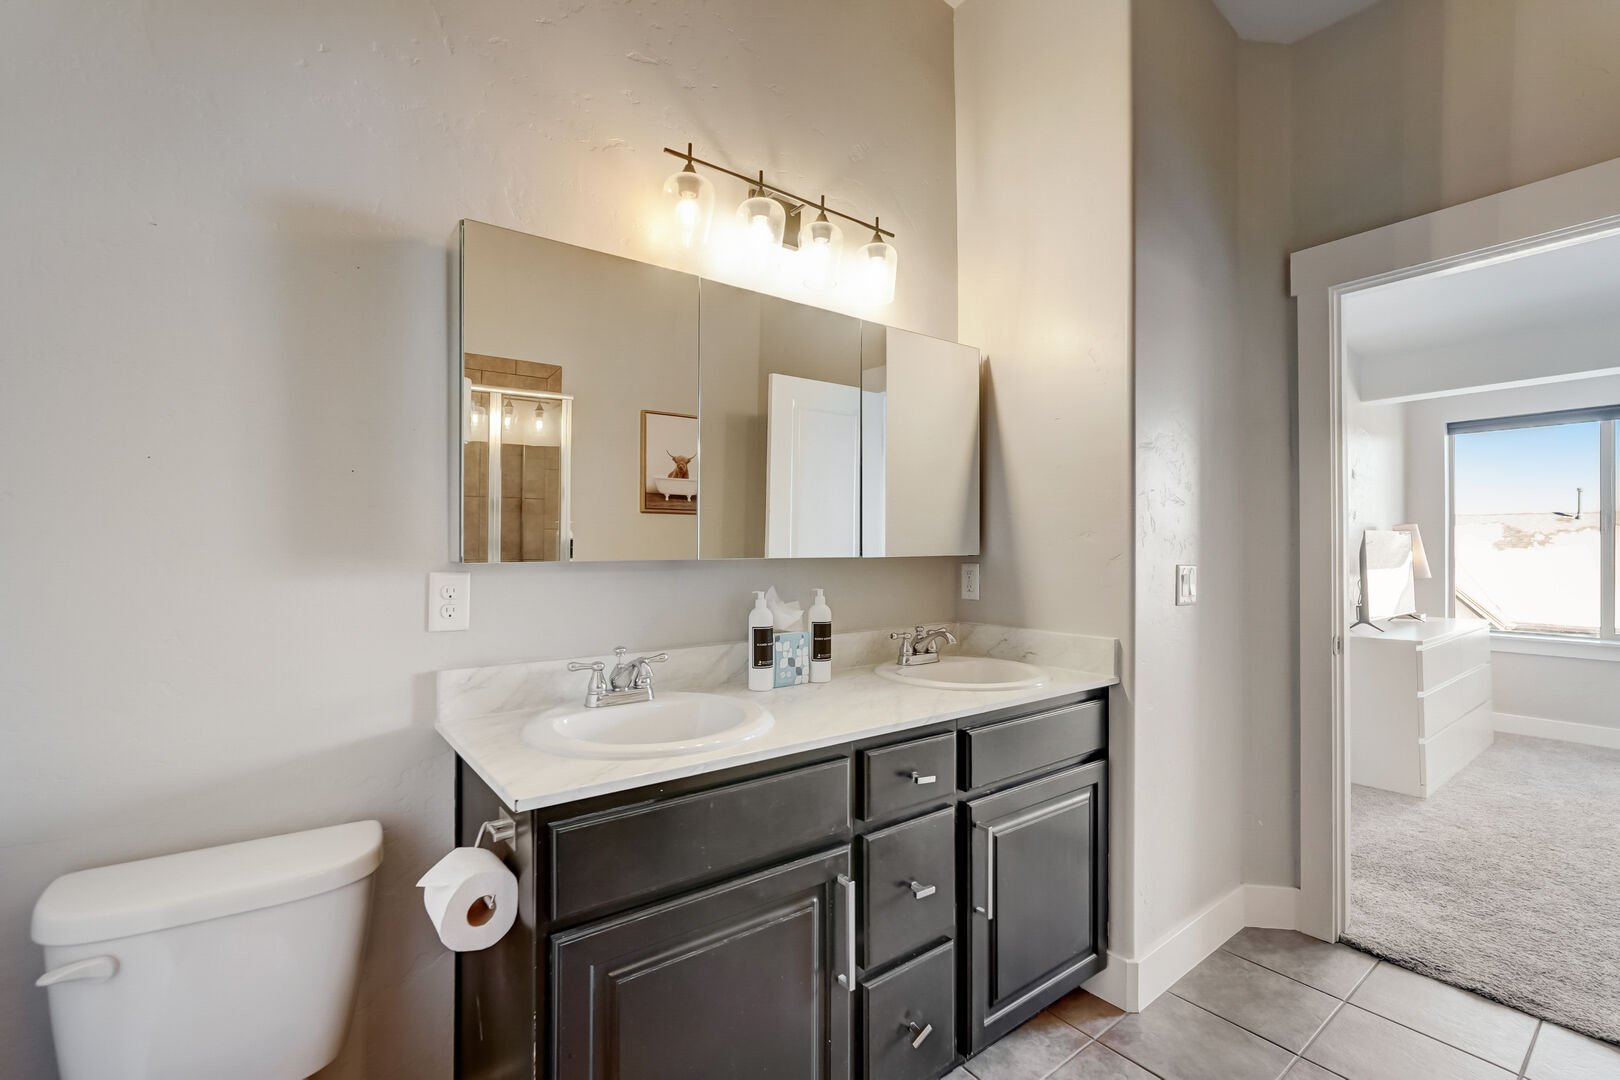 Primary Bathroom with Soaking Tub & Walk-In Shower (Top Level)